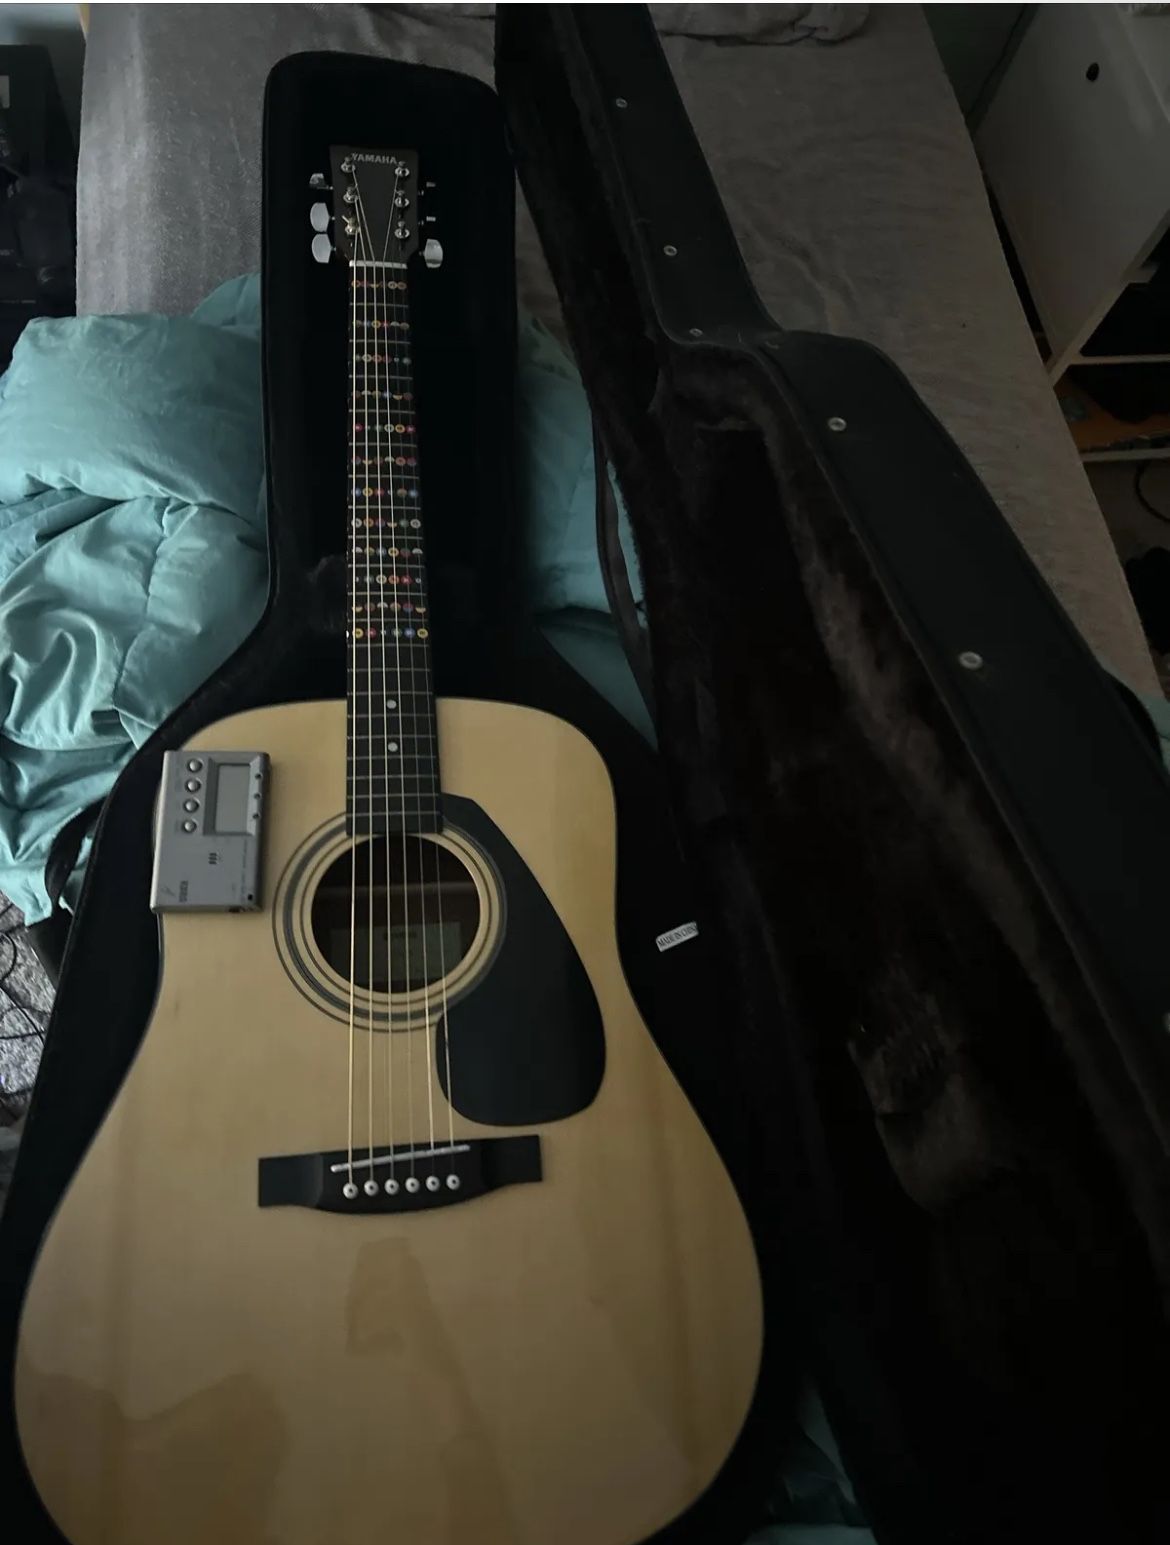 Yamaha Guitar With Tuner And Case